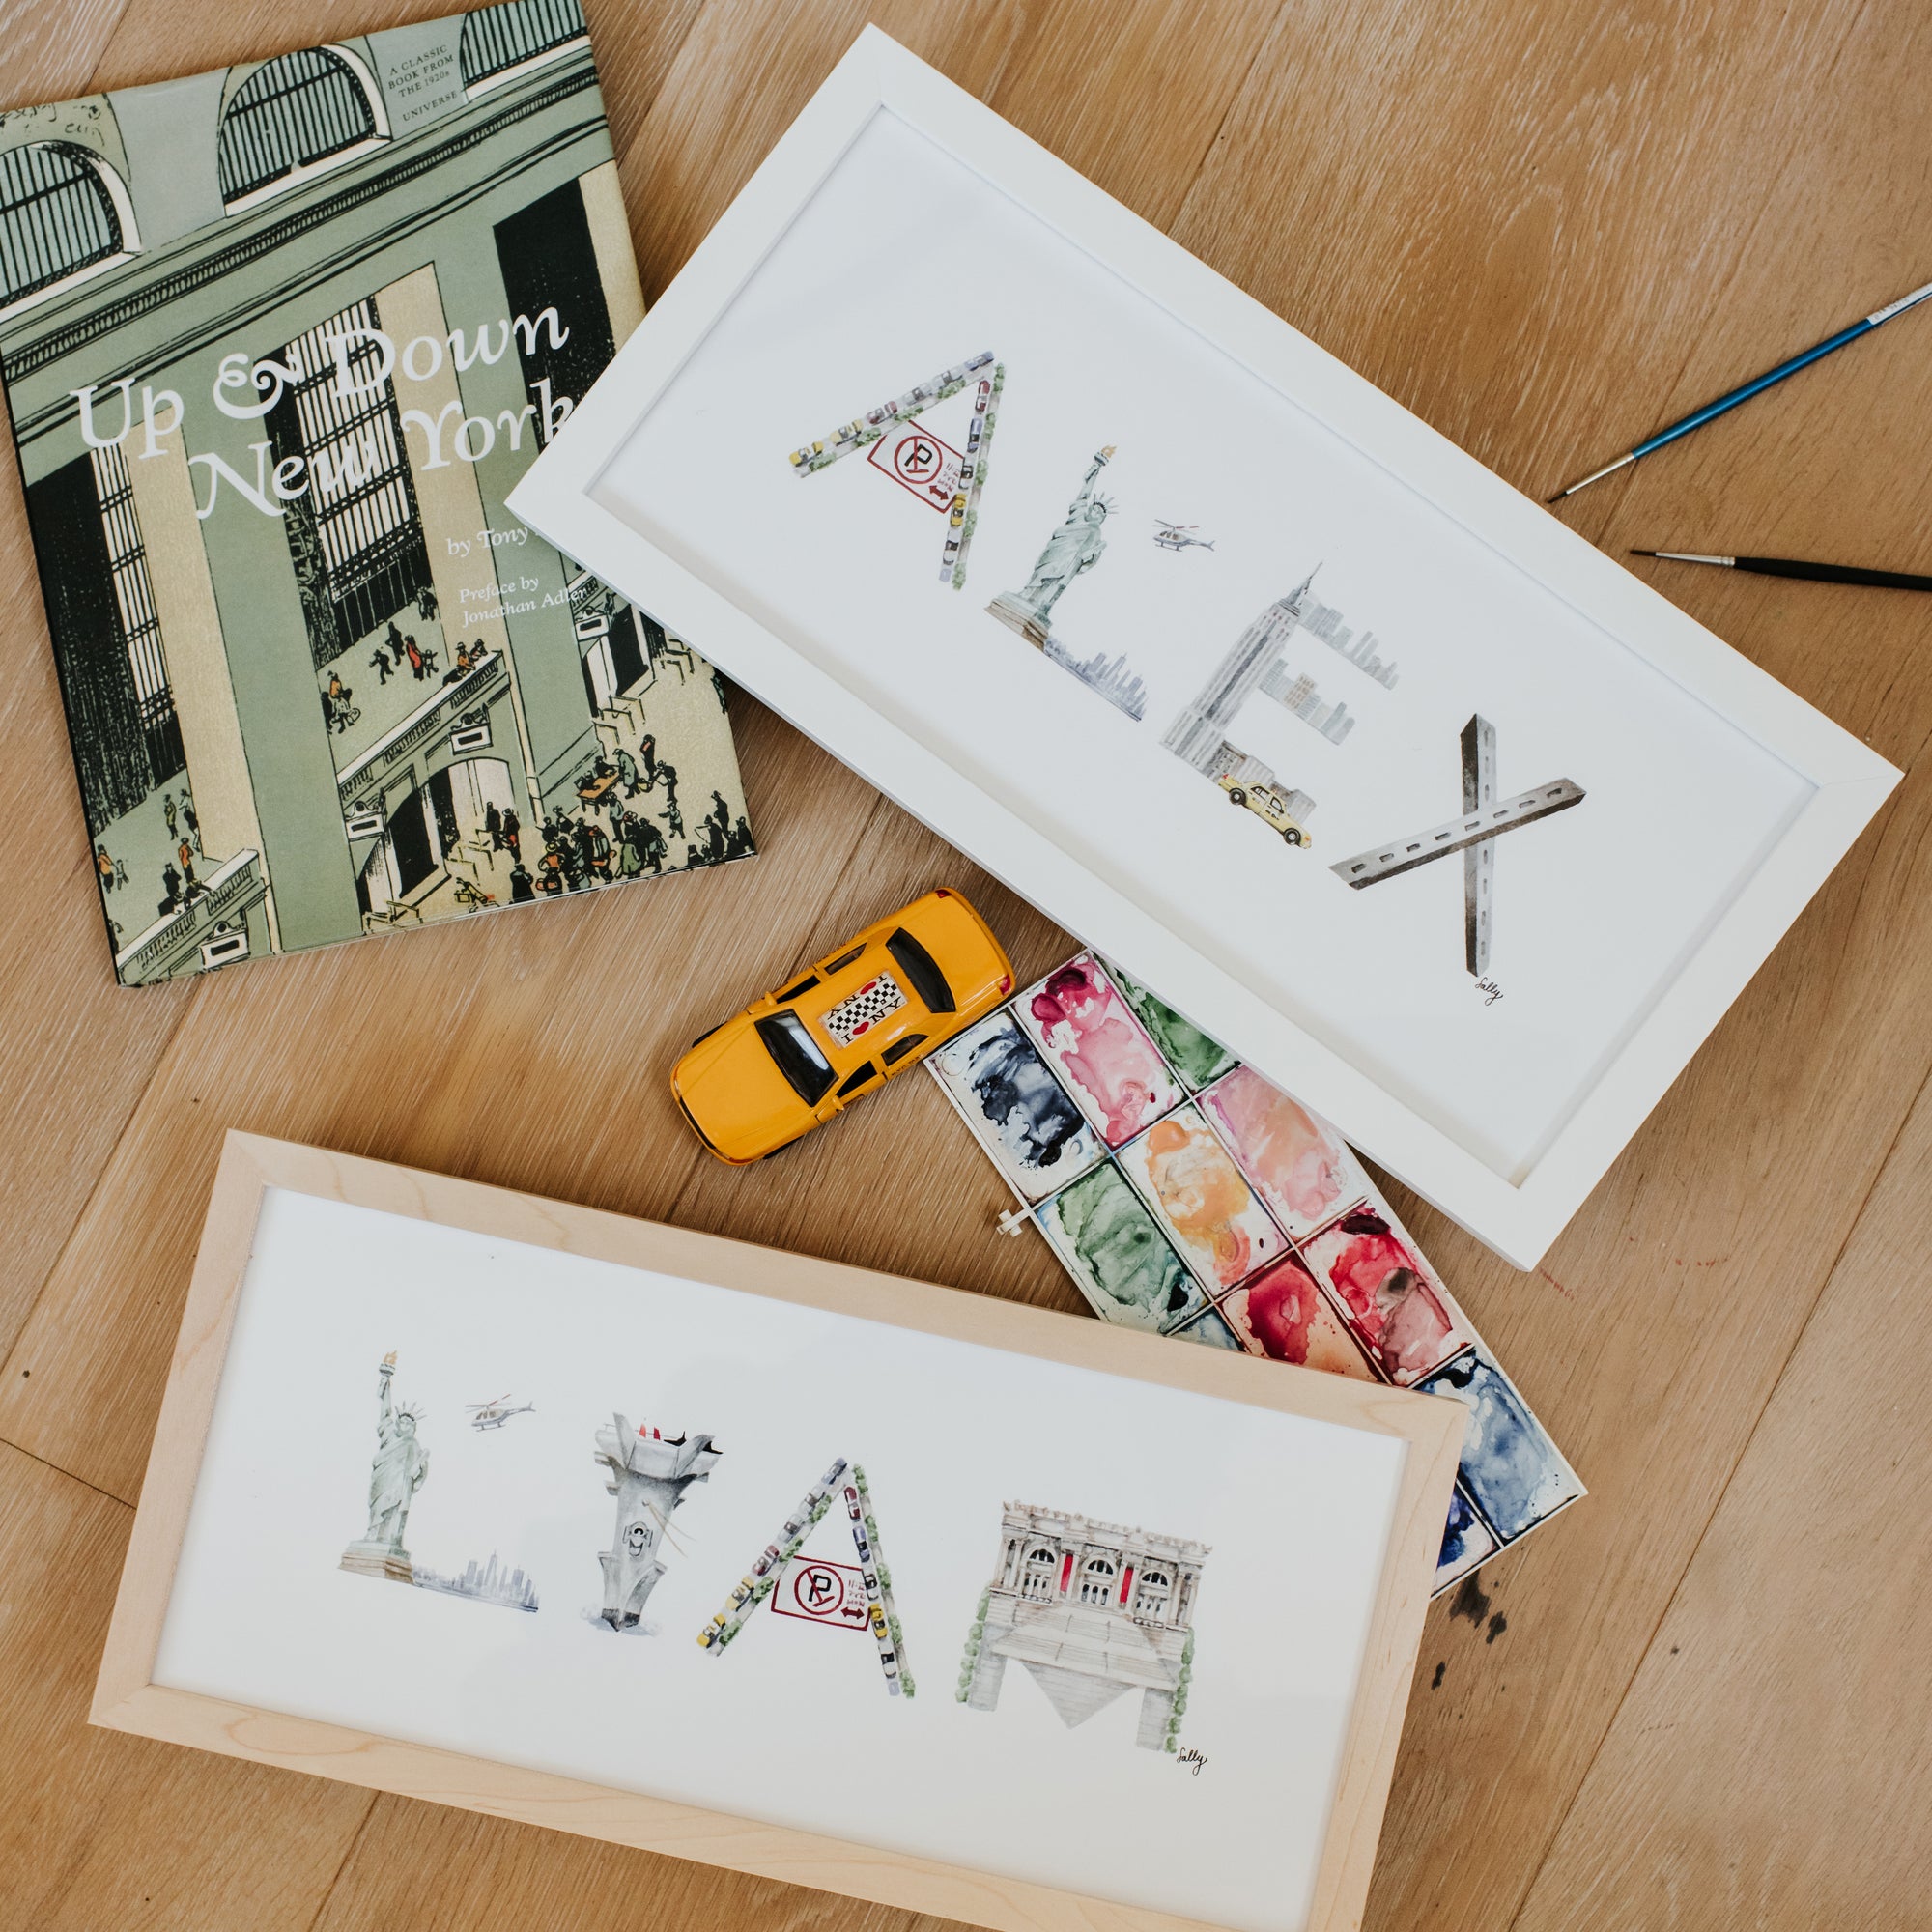 "Alex" and "Liam" Custom Name Prints in New York City letters